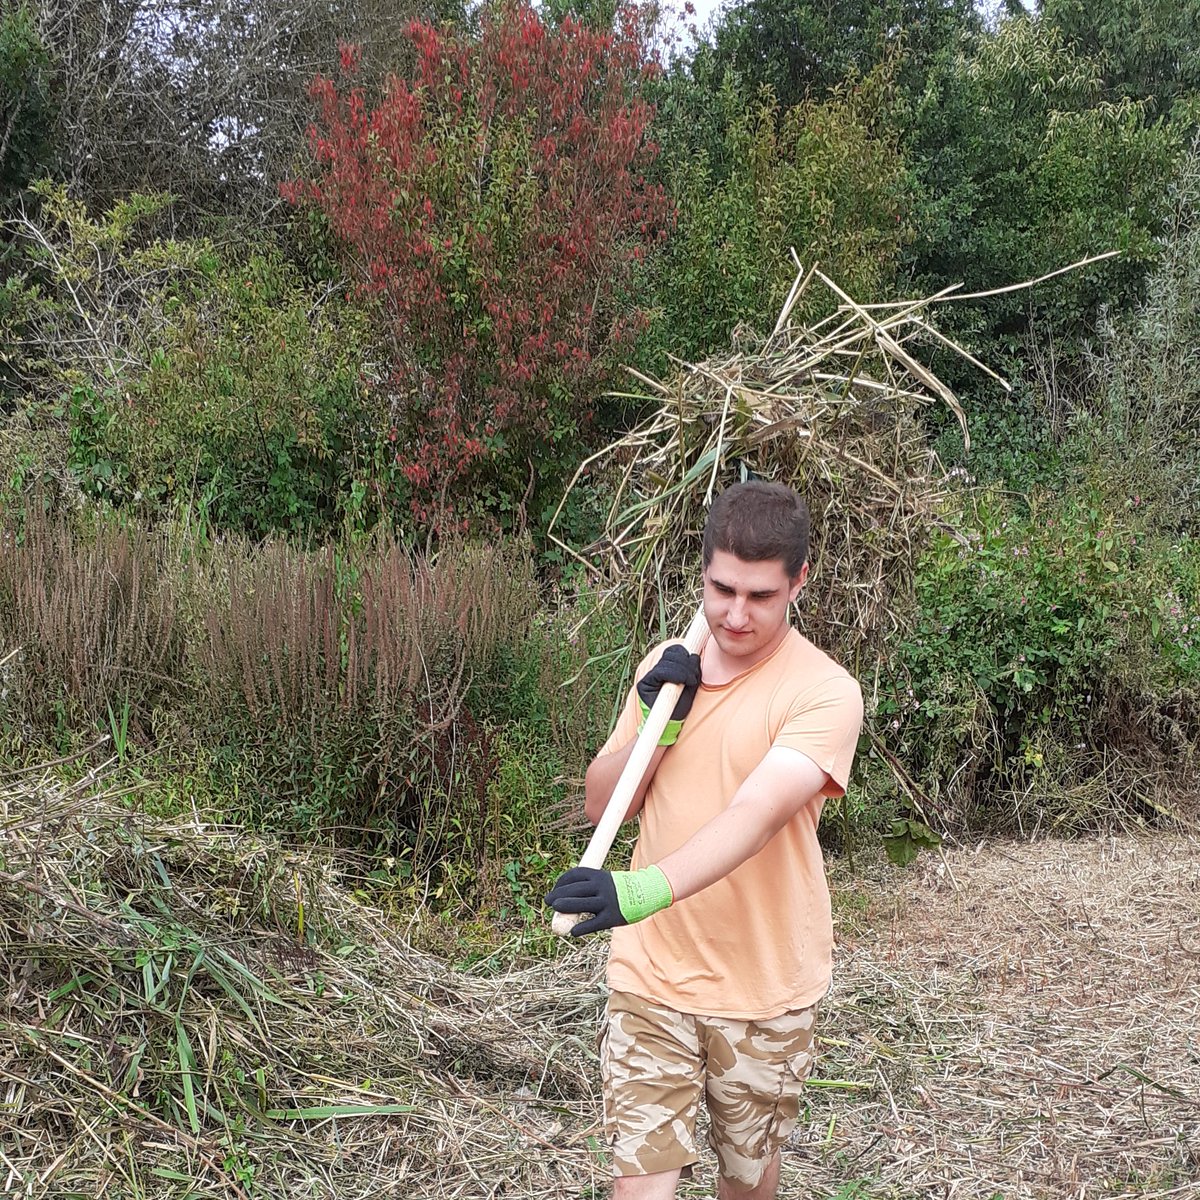 Worked really hard today clearing reeds from the wetlands area. Great job @InnovateTrust @WCVACymru @TakeChargeIT @StepOnProject1 #biodiversity #Wellbeing #AutismAwareness